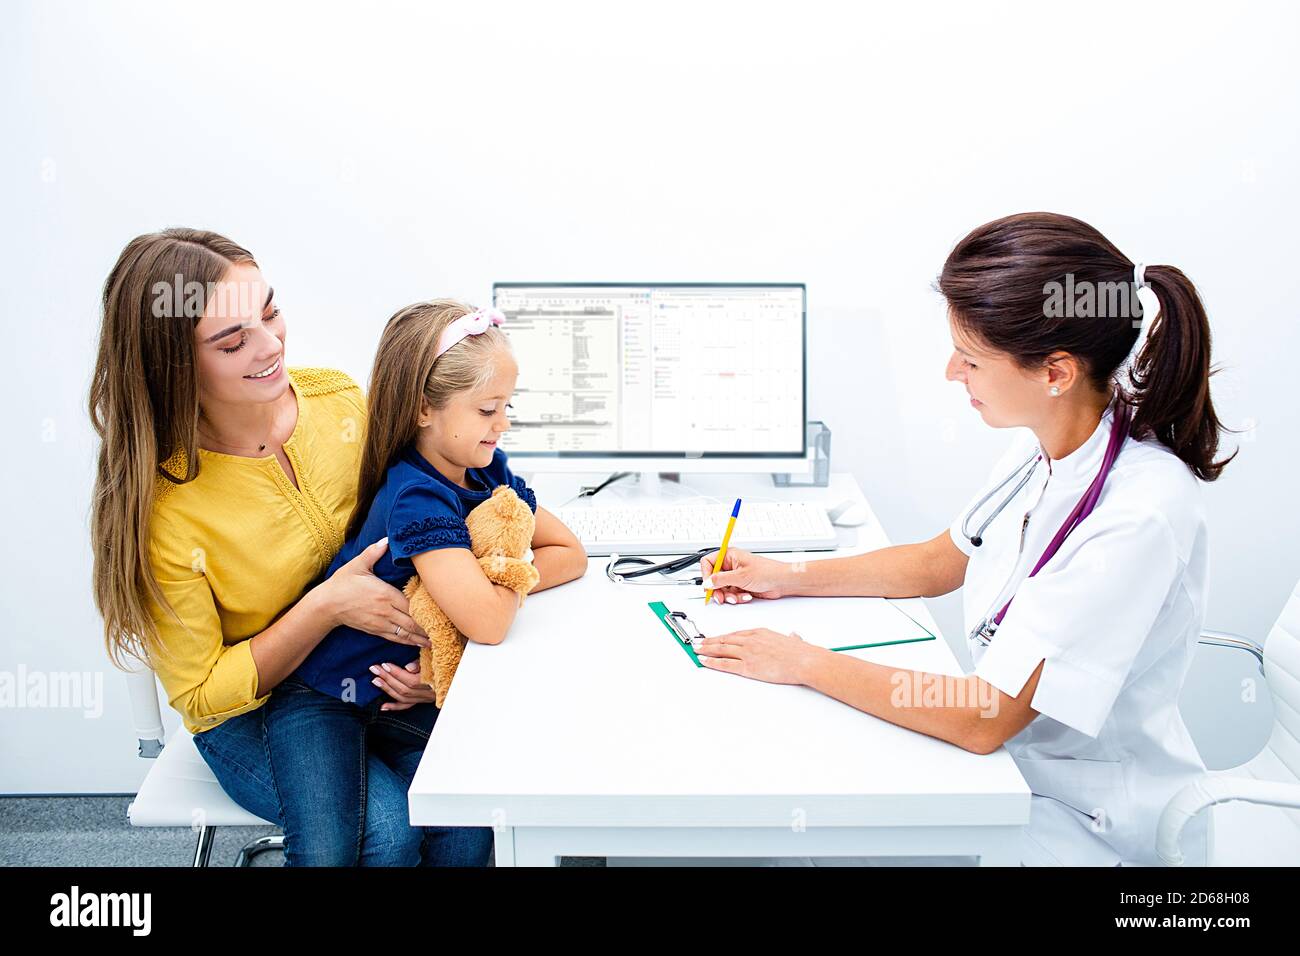 Friendly pediatrician meeting with parent and child in the hospital. Consultation, kid health. Stock Photo